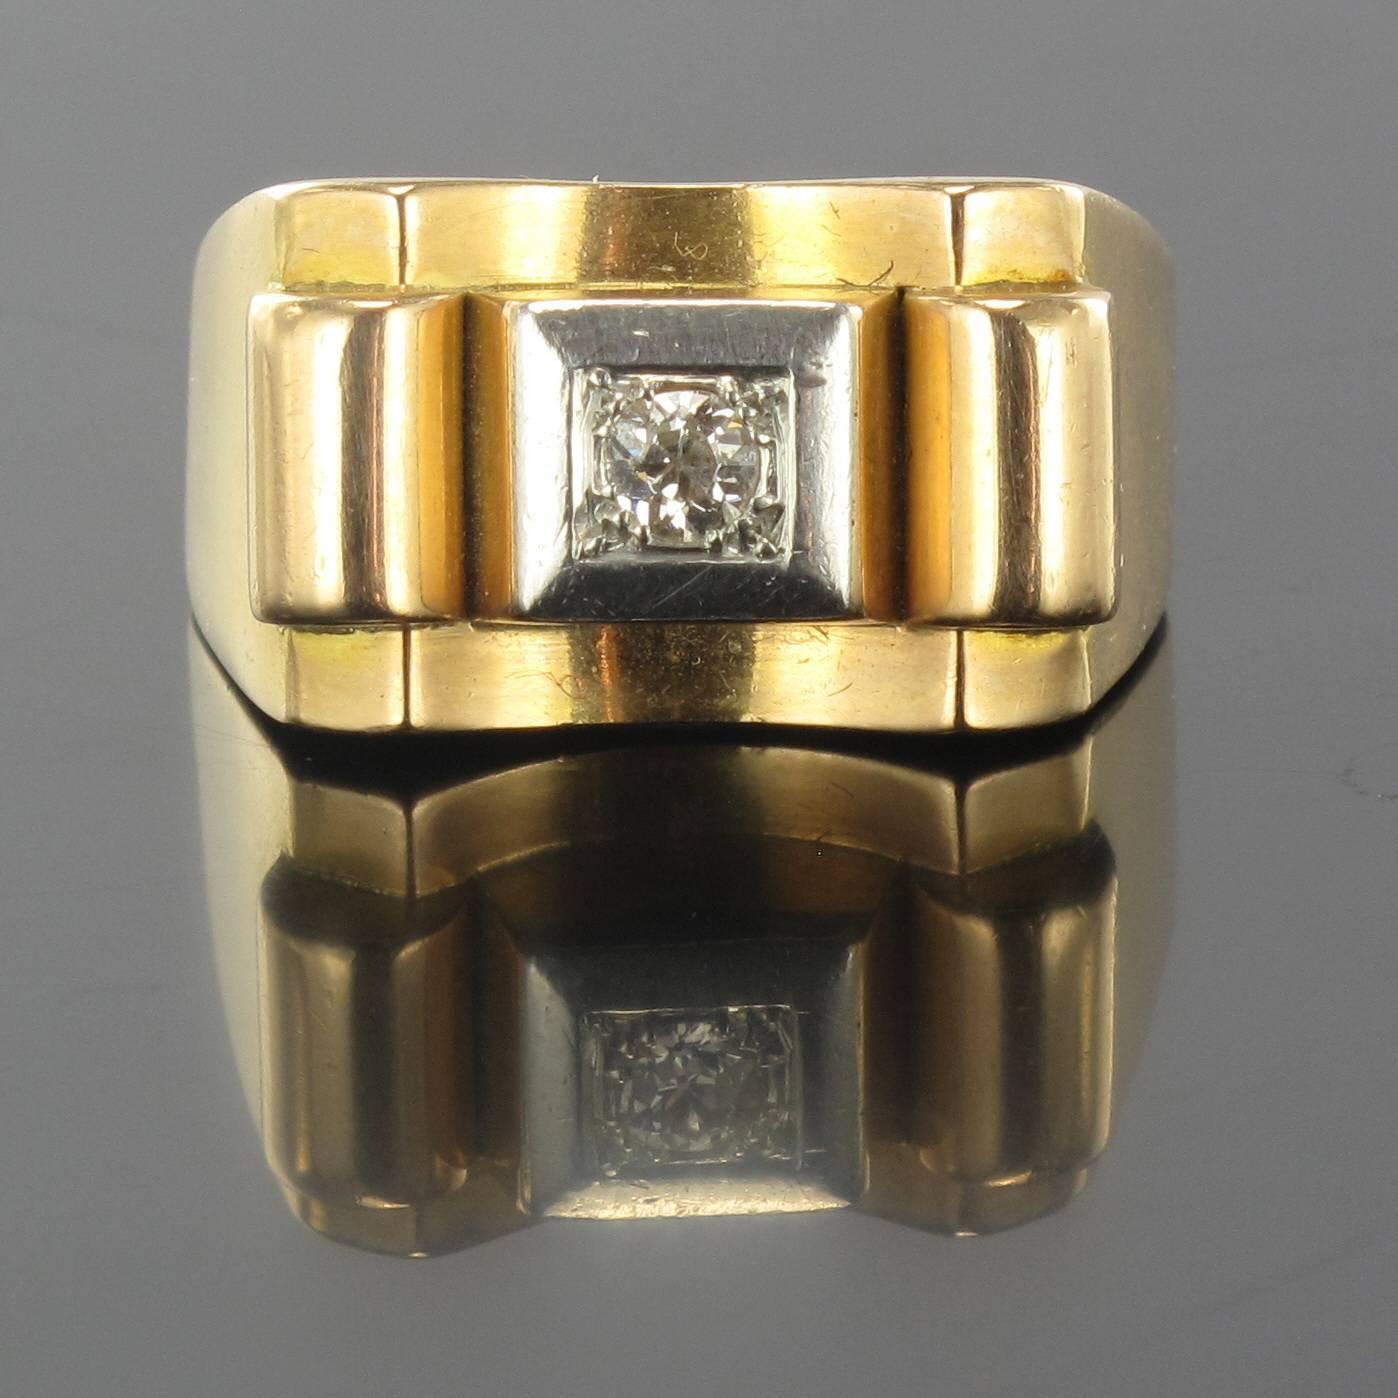 Ring in 18 carat yellow gold, eagle head hallmark. 

This tank ring in the form of a bridge is set with a brilliant cut diamond in a 2 ½ cylinder setting within a square design. 

Height: 7 mm, width: 1.8 cm, ring width at the base: 2 mm.
Total